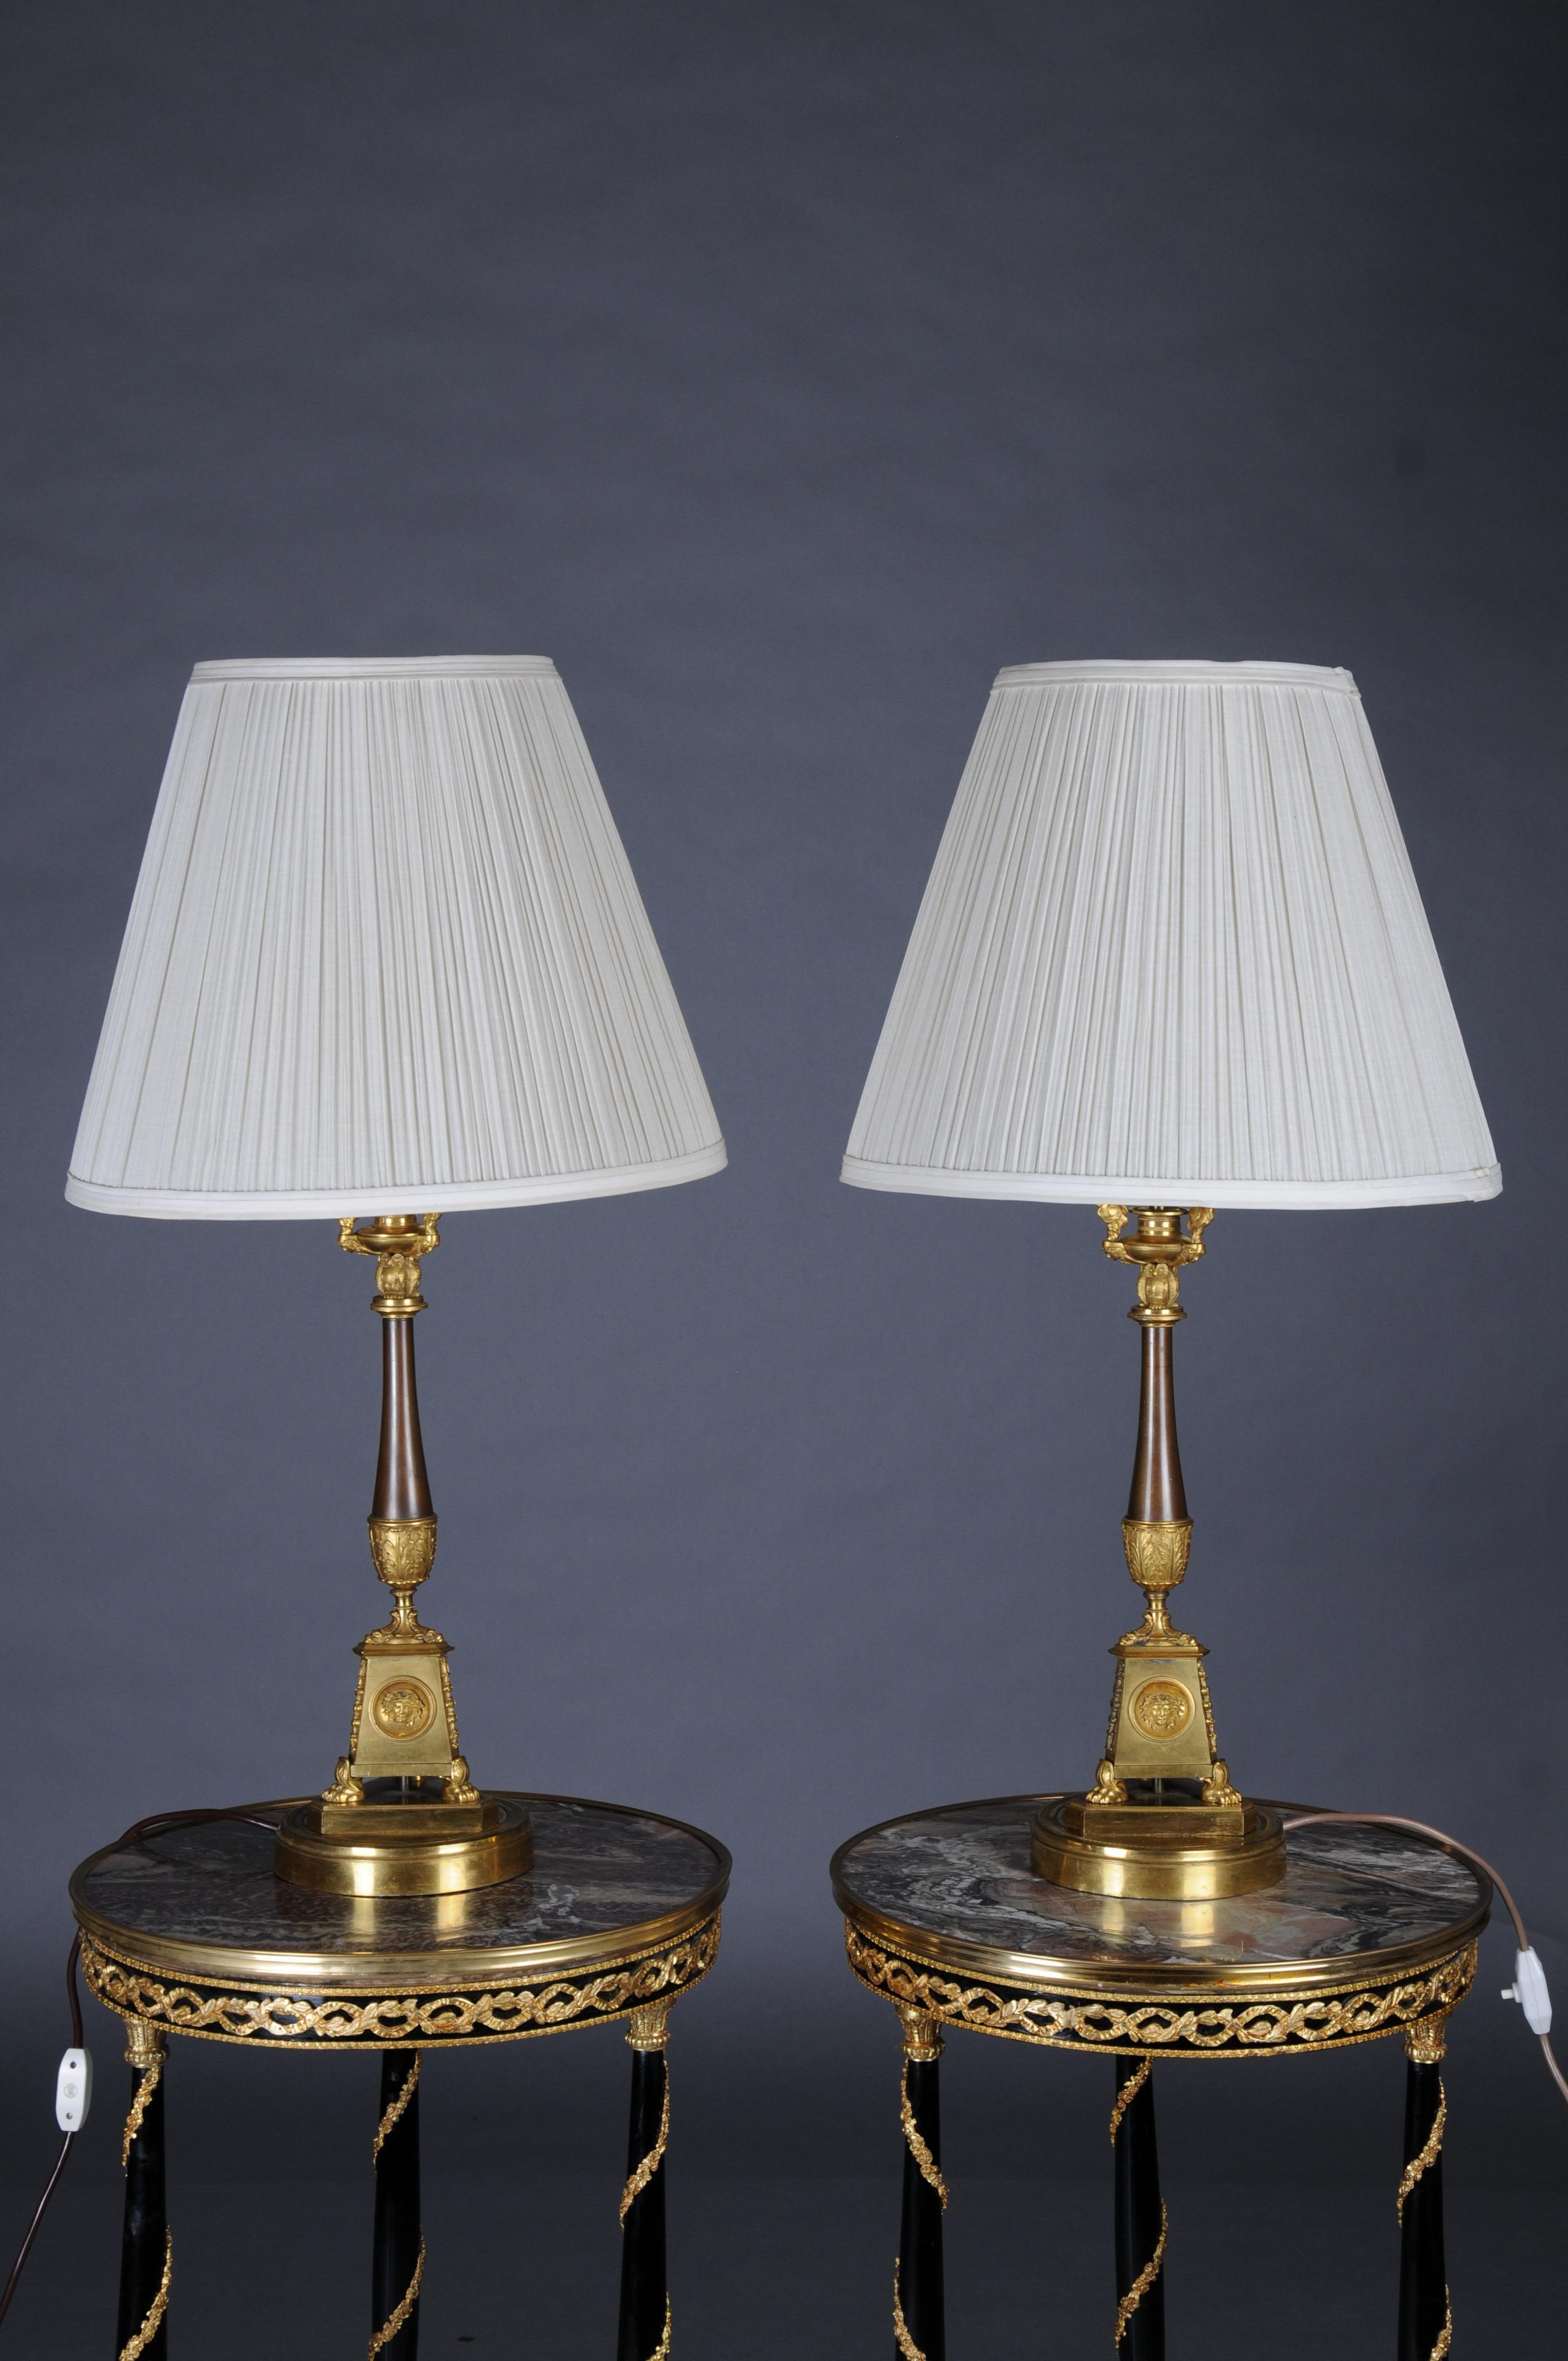 Pair (2) Empire bronze Table lamps around 1805, Paris, fire gilded. For Sale 14